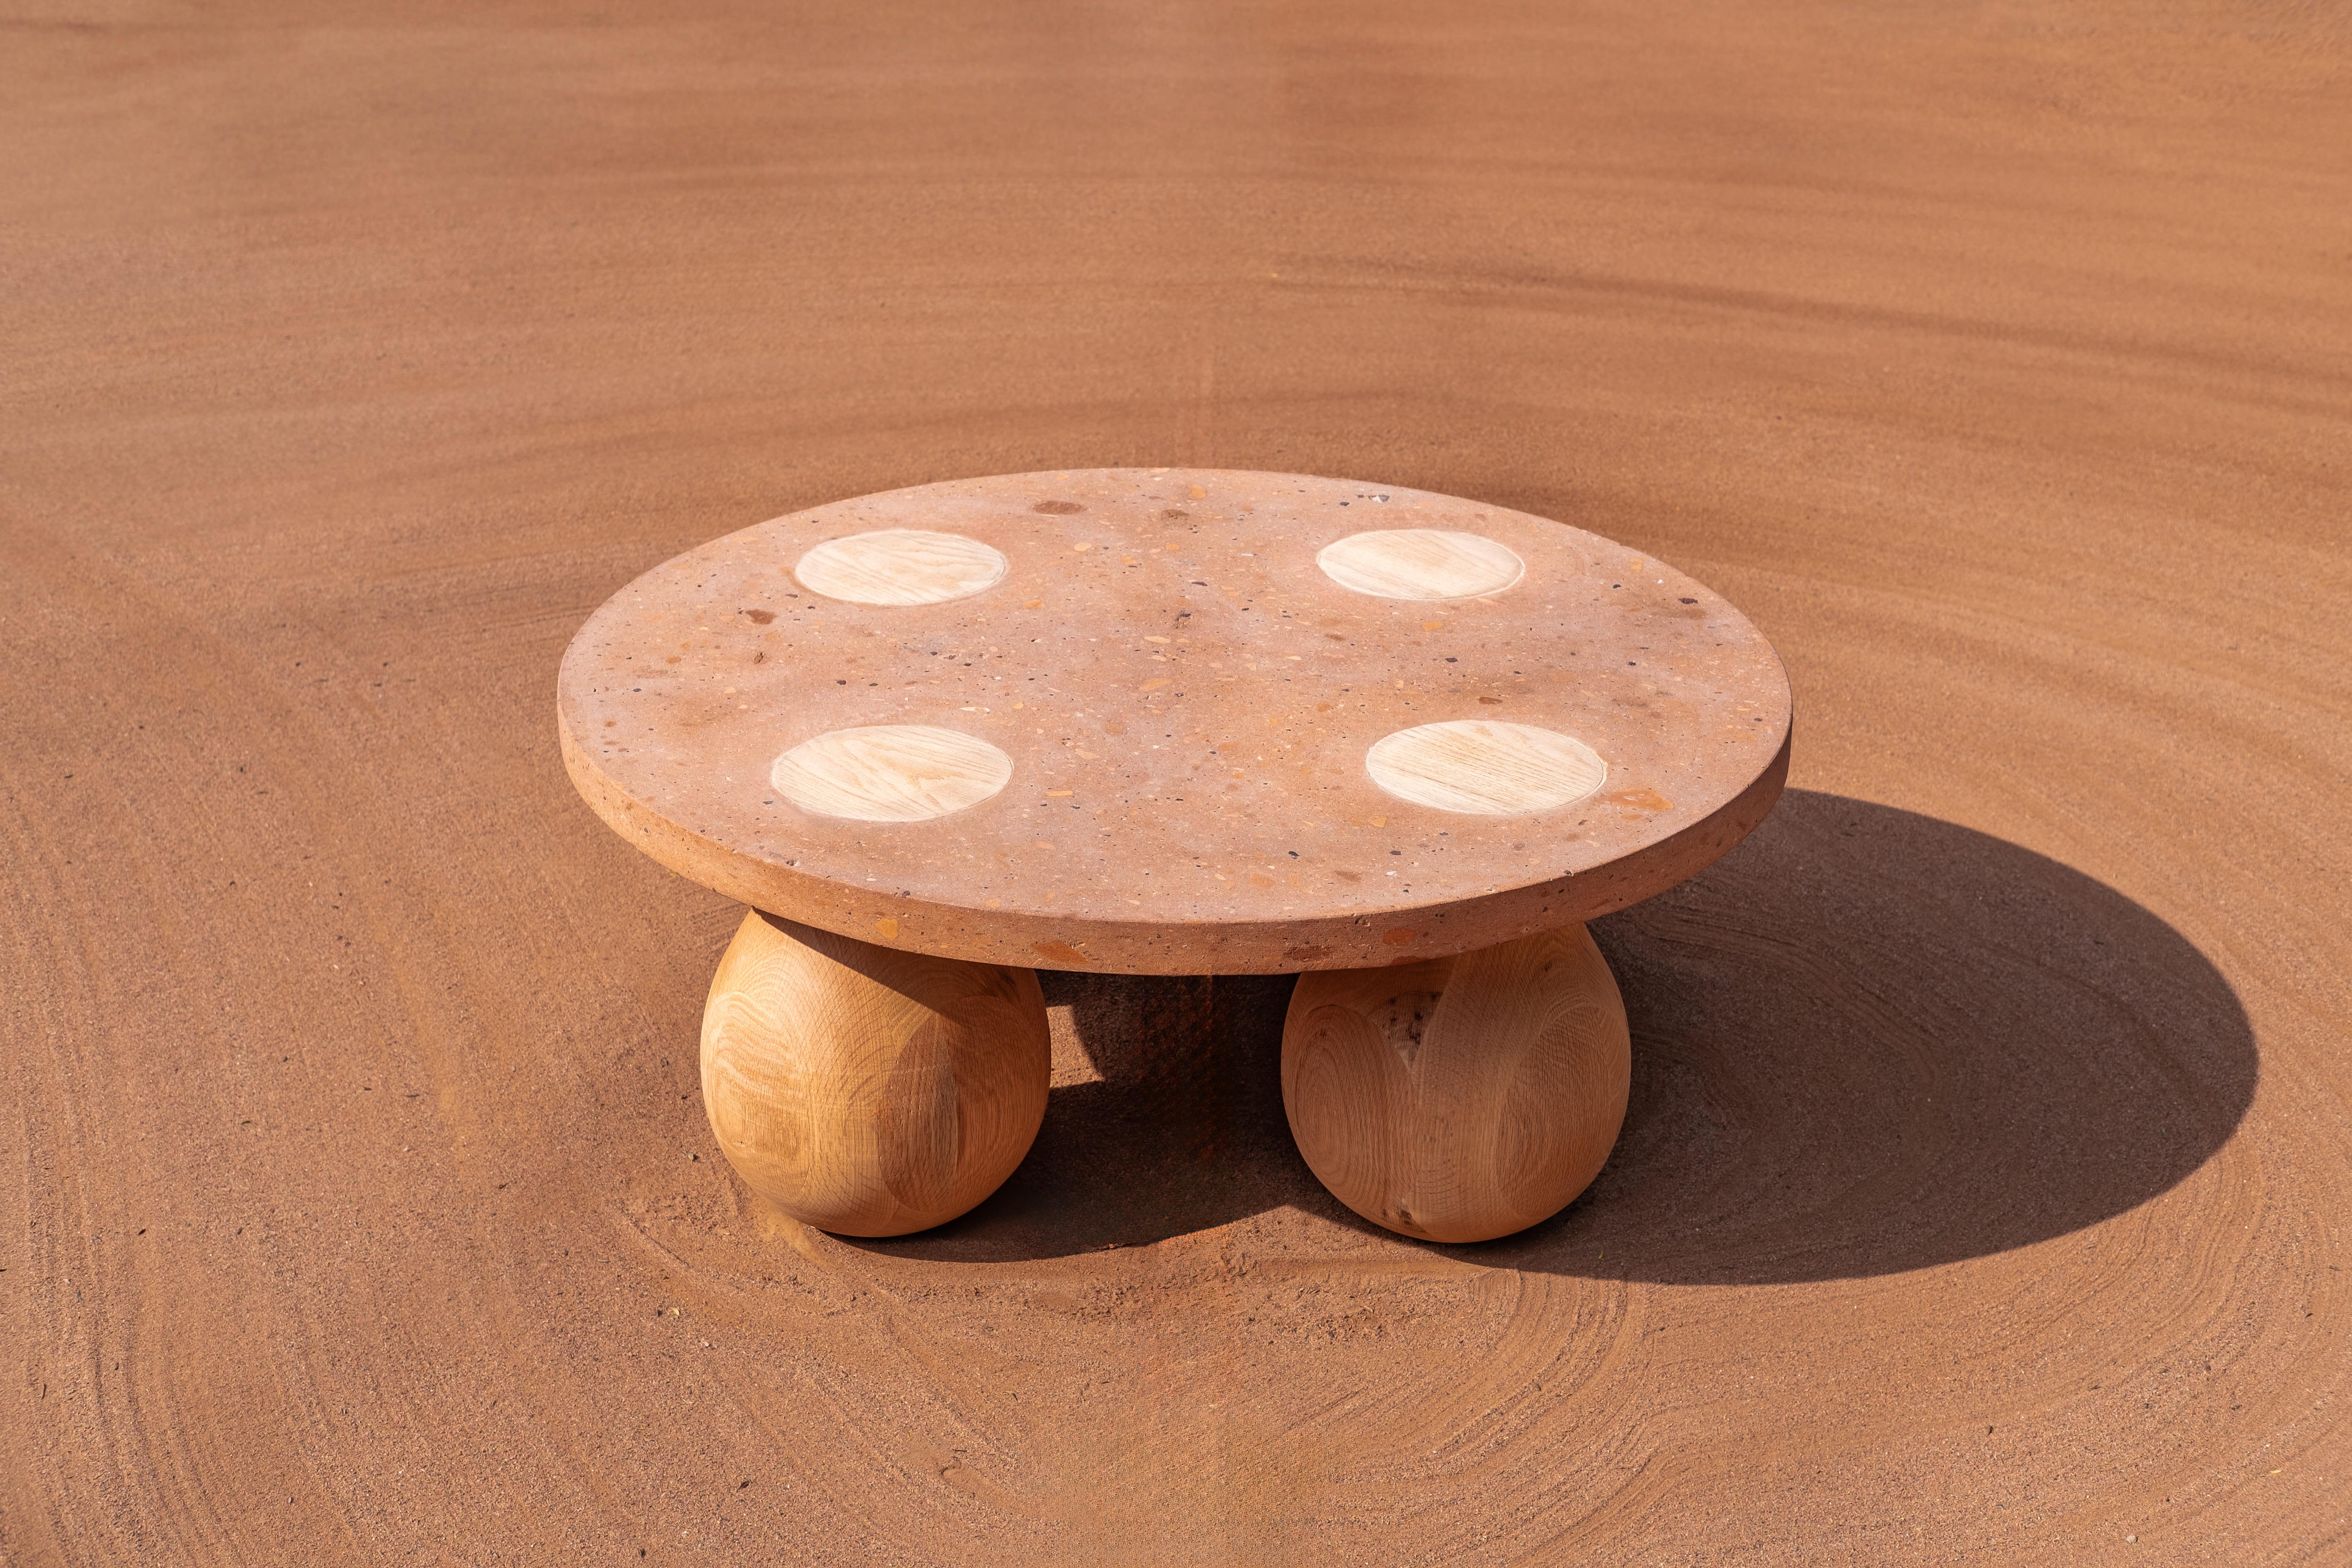 Waje Center Table by Comuna MX
Dimensions: W 90 x D 90 x H 43 cm
Materials: Orange Cantera Stone, Oak Wood.  
Weight: 70 Kg.

Some parts of this product are handmade, so they may vary in color, shape, texture, and size.
Some parts of this product